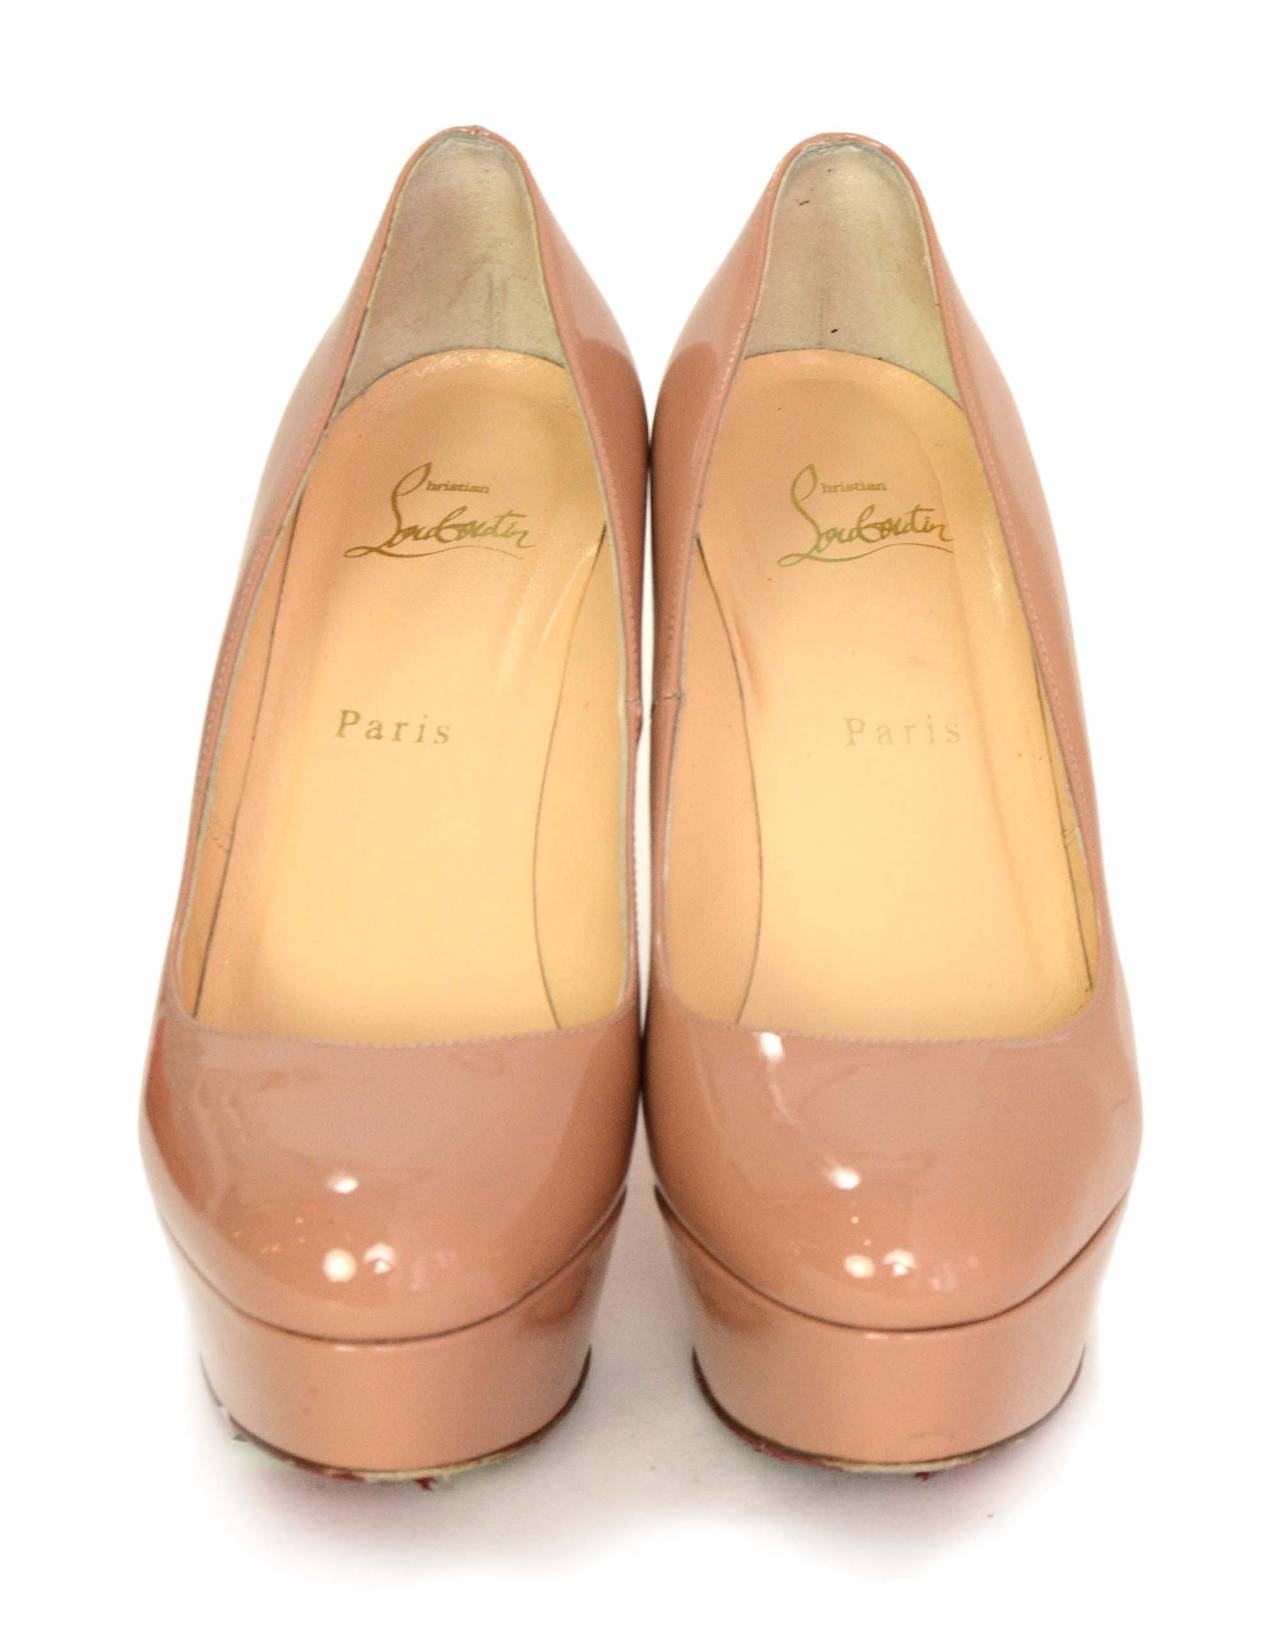 Christian Louboutin Nude Patent Bianca Platform Pumps sz 38.5 rt. $875 In Excellent Condition In New York, NY